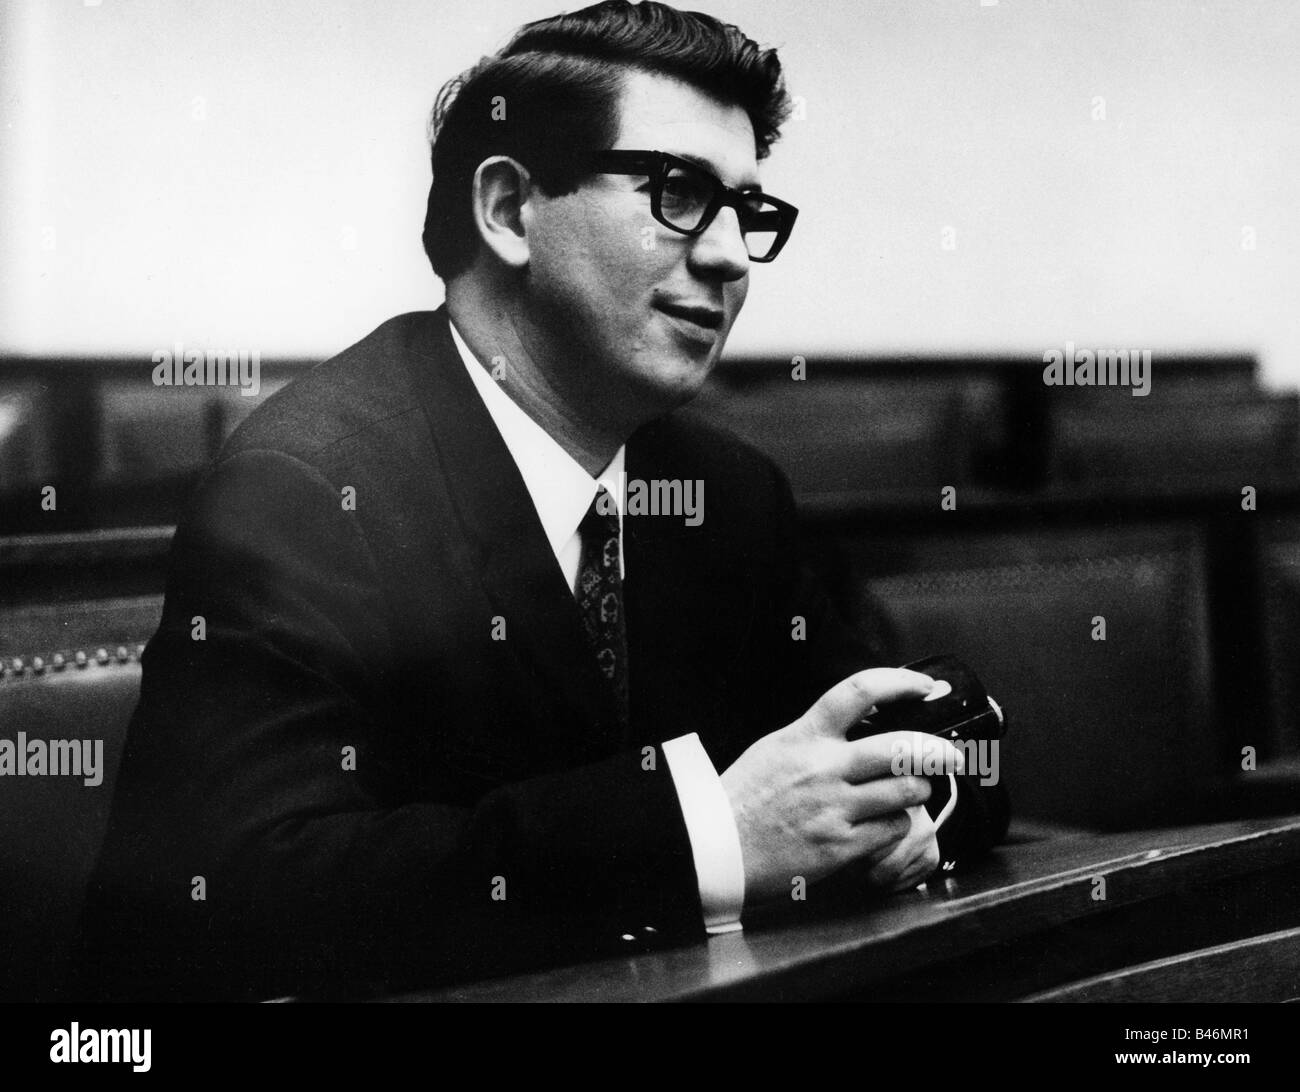 Schoefberger, Rudolf , * 29.7.1935, German politician (SPD), Member of the Bavarian Parliament 1966 - 1972, in the Assembly Room, Munich, circa 1970, , Stock Photo